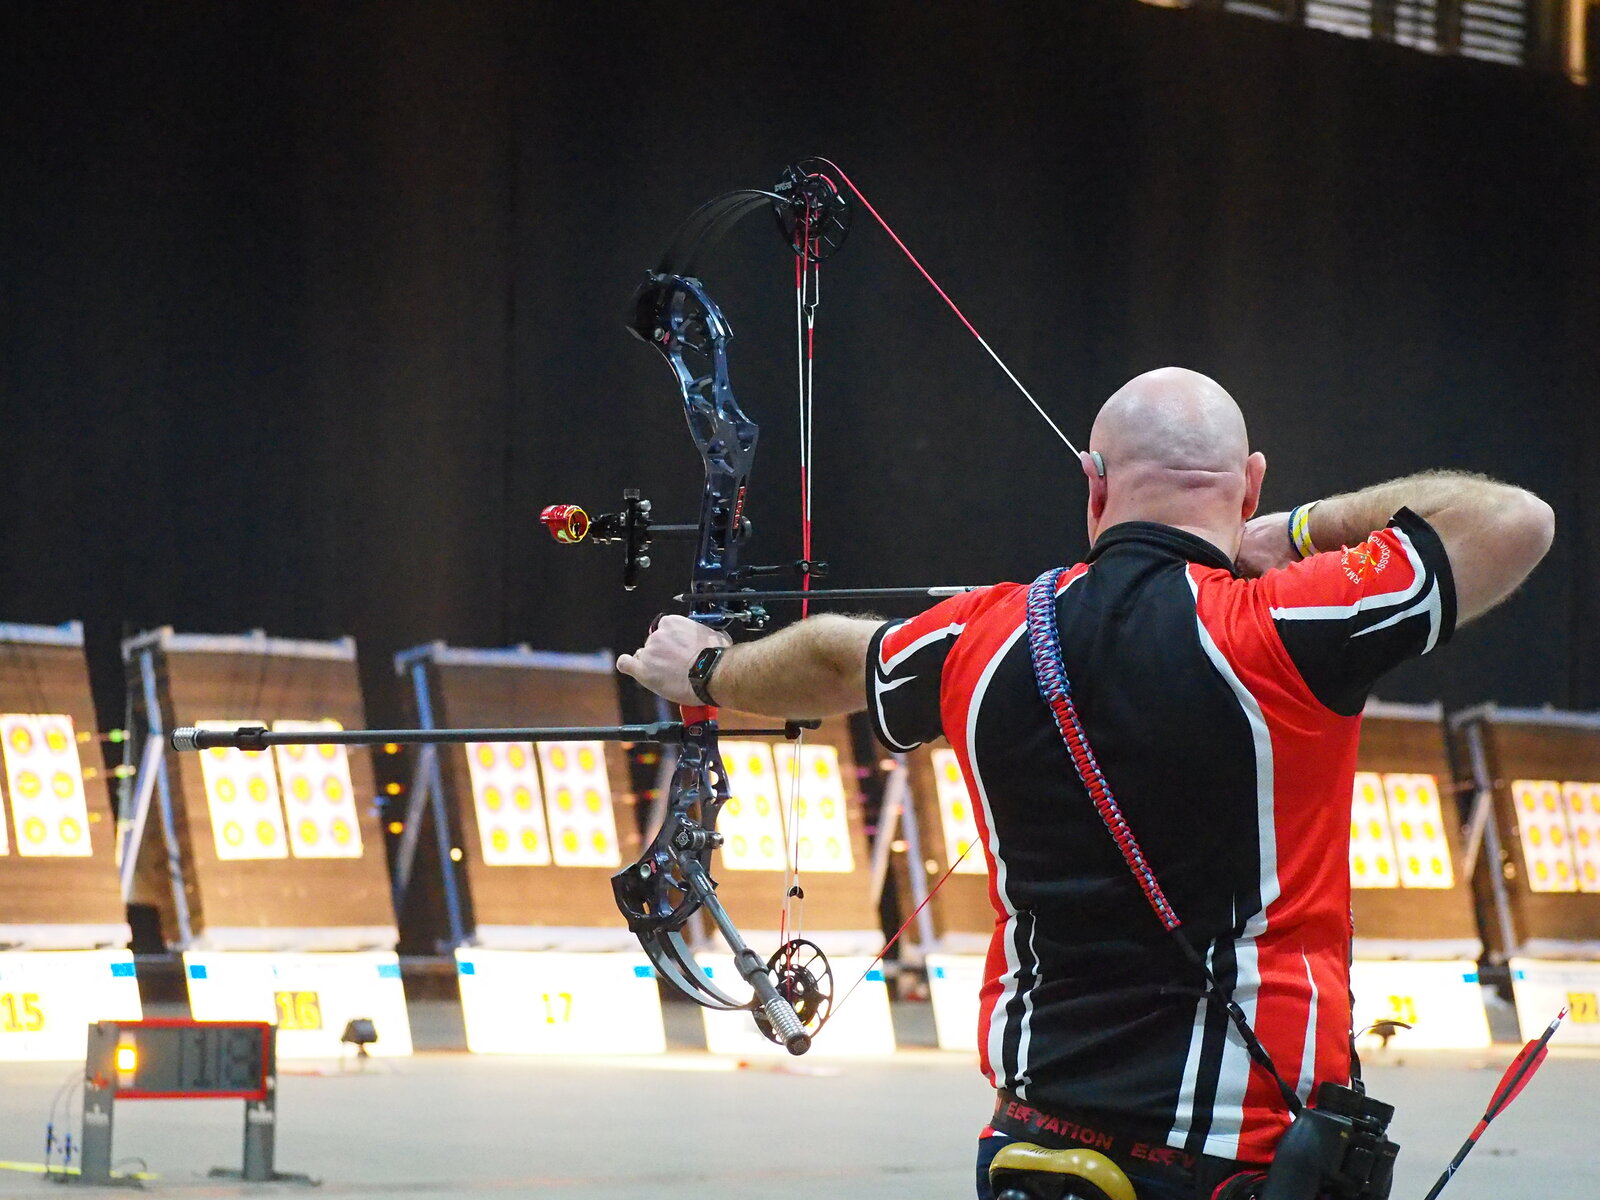 Archery GB National Indoor Championships